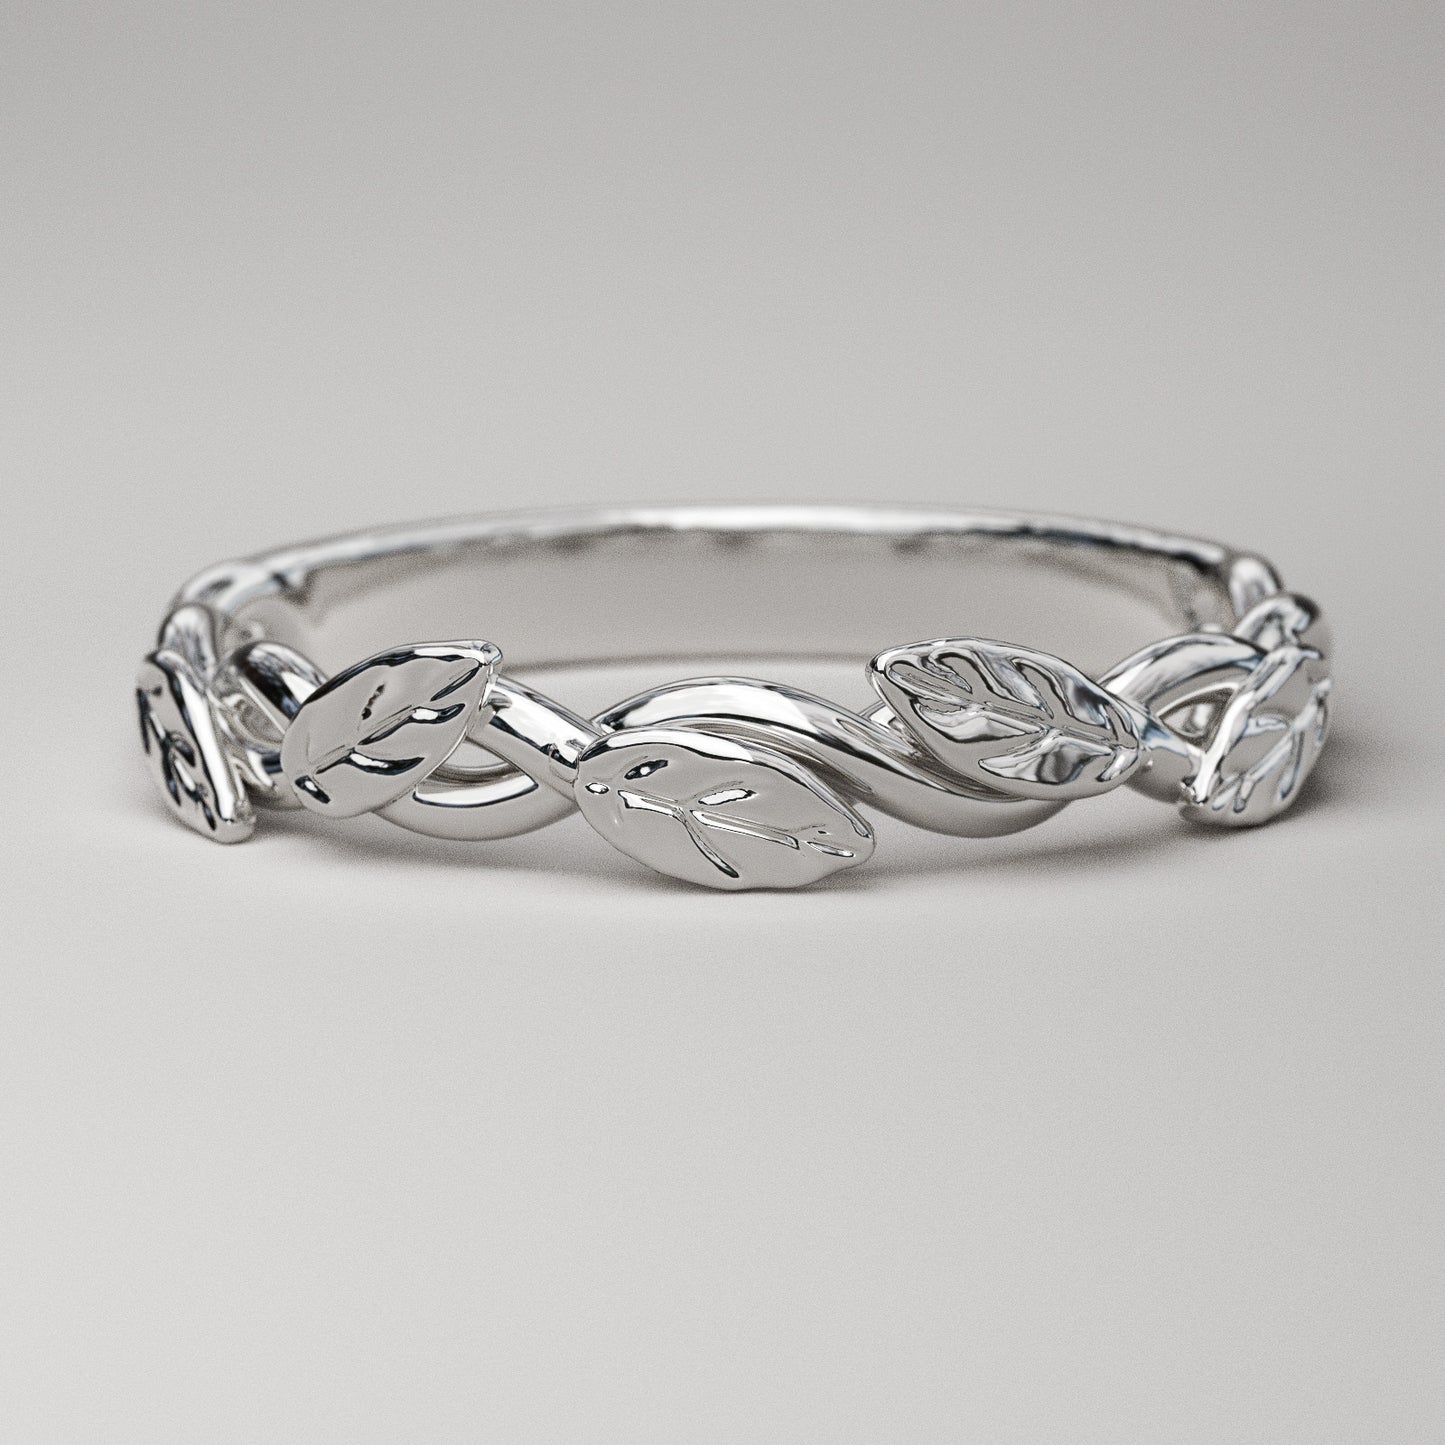 intertwined vine ring with leaves in white gold